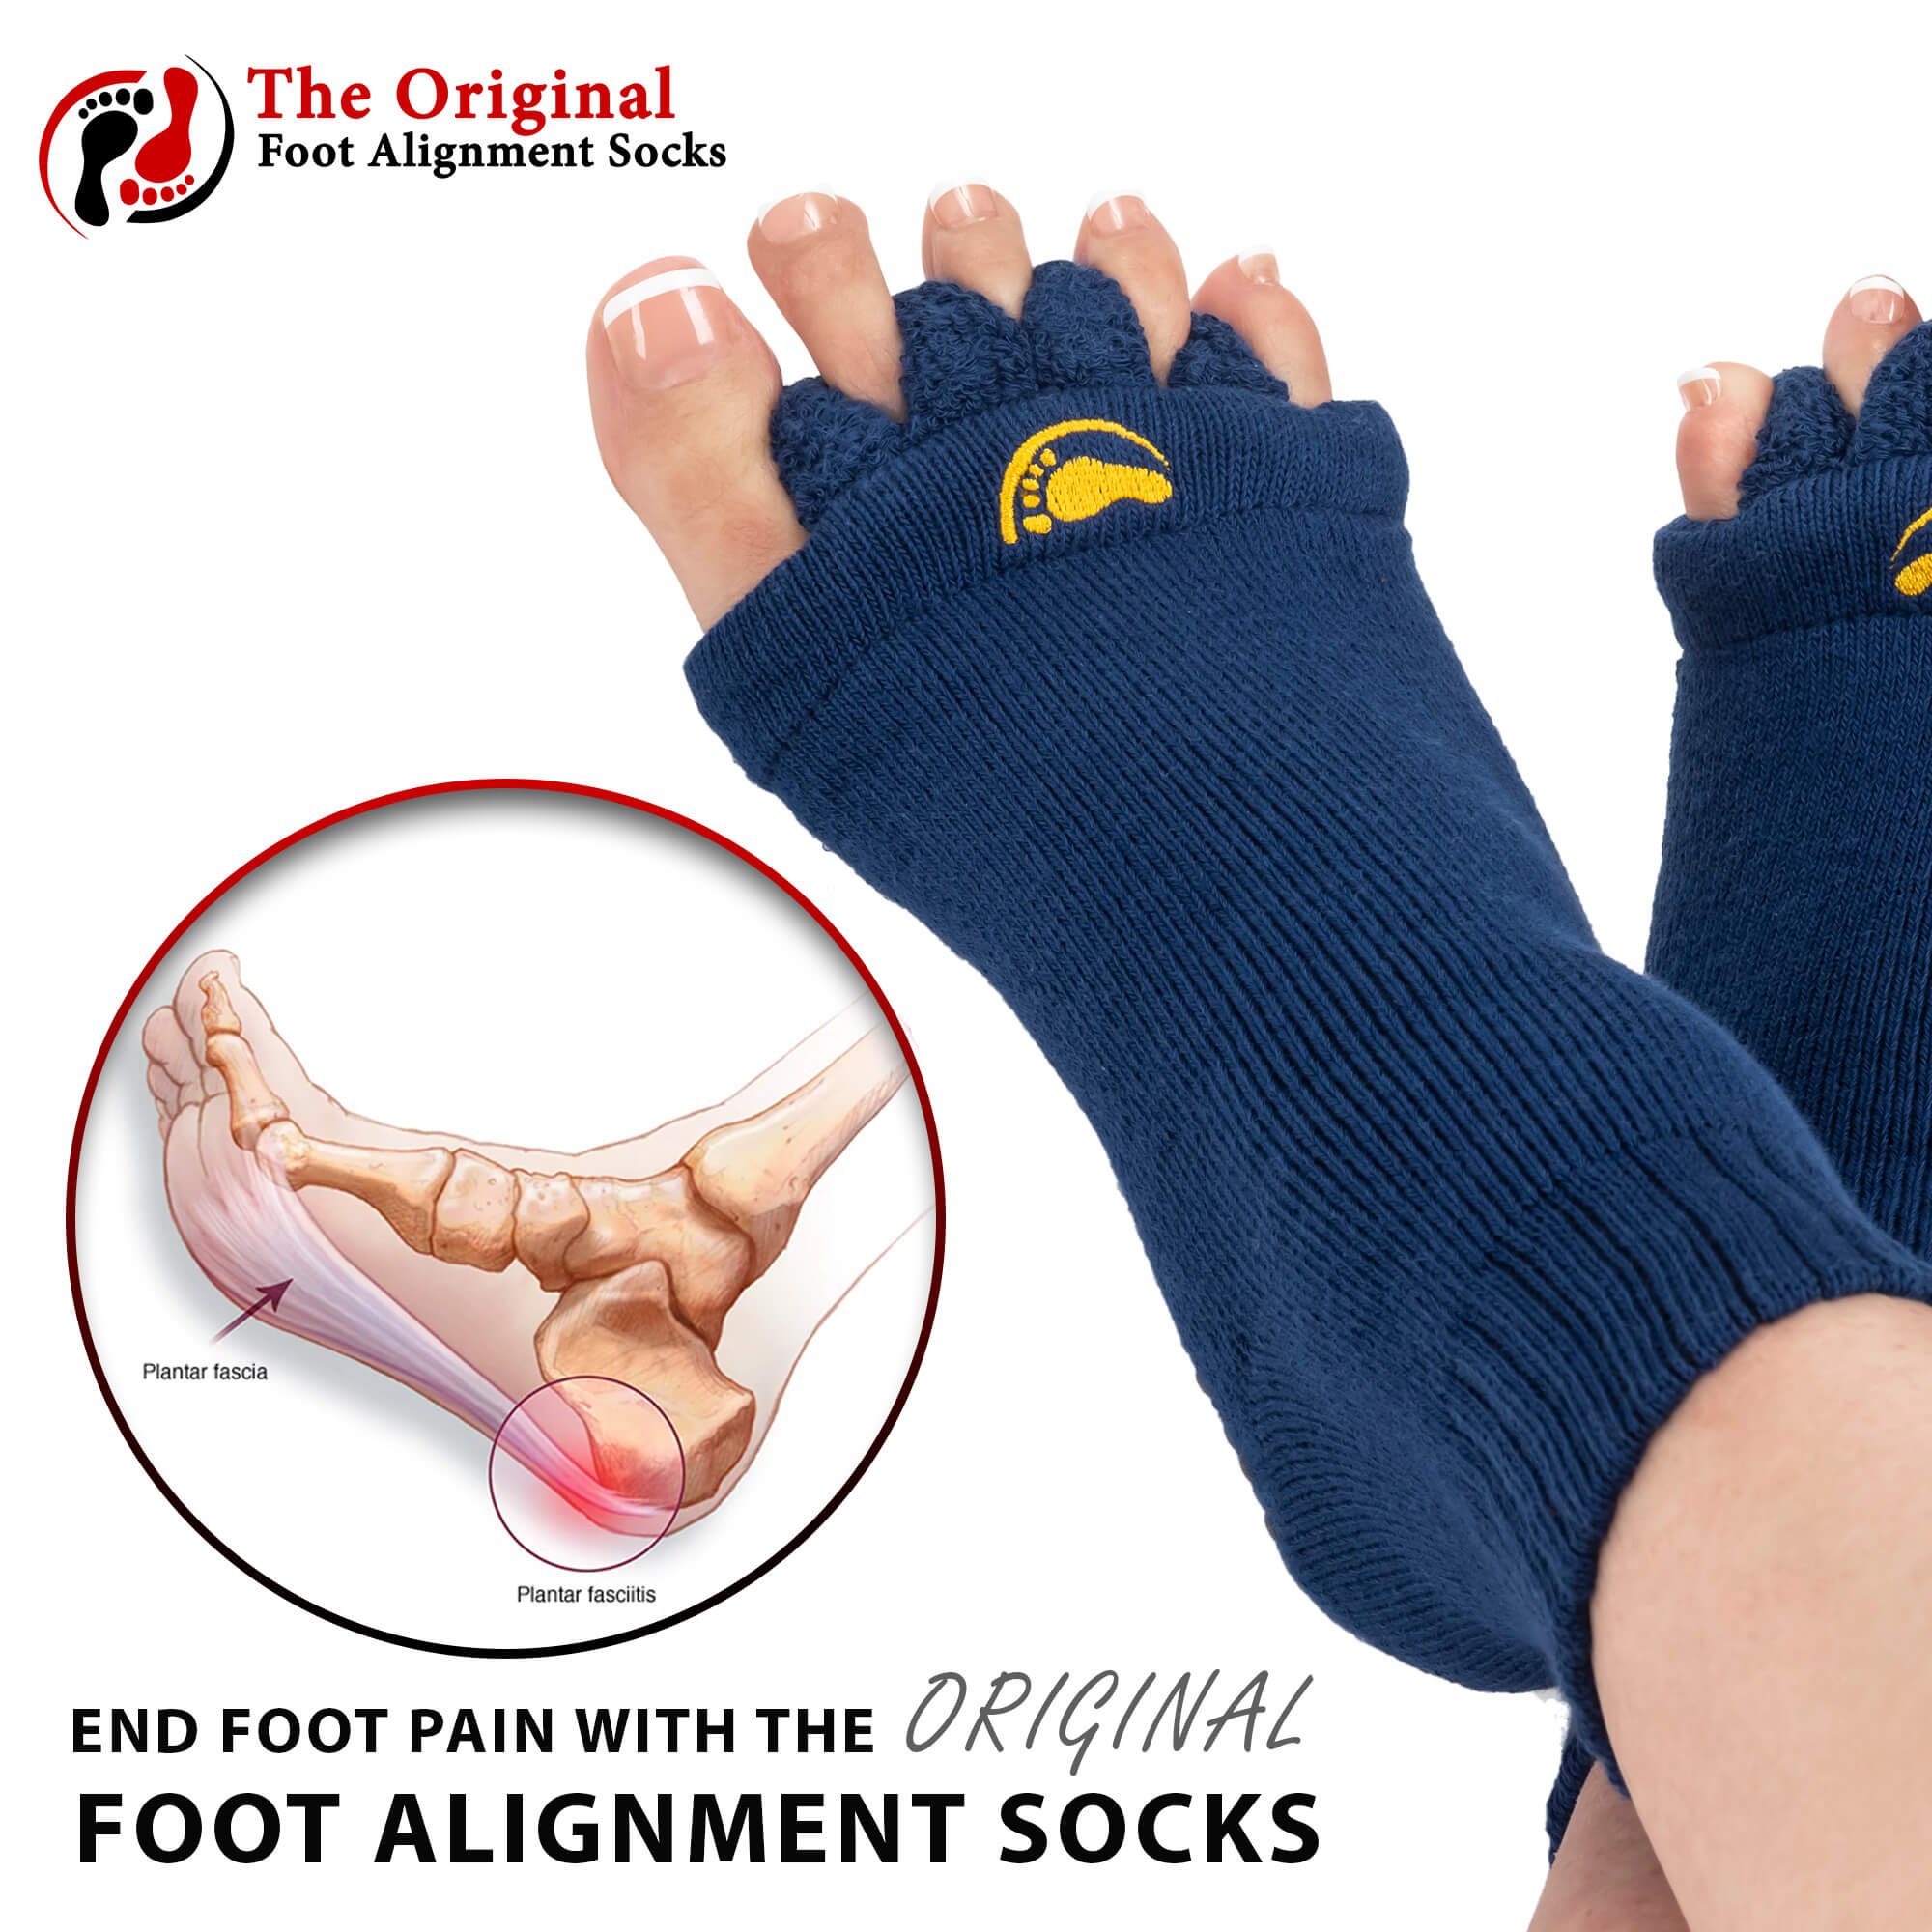 Relieve foot pain with Foot Alignment Socks with grippers. – My-Happy Feet  - The Original Foot Alignment Socks